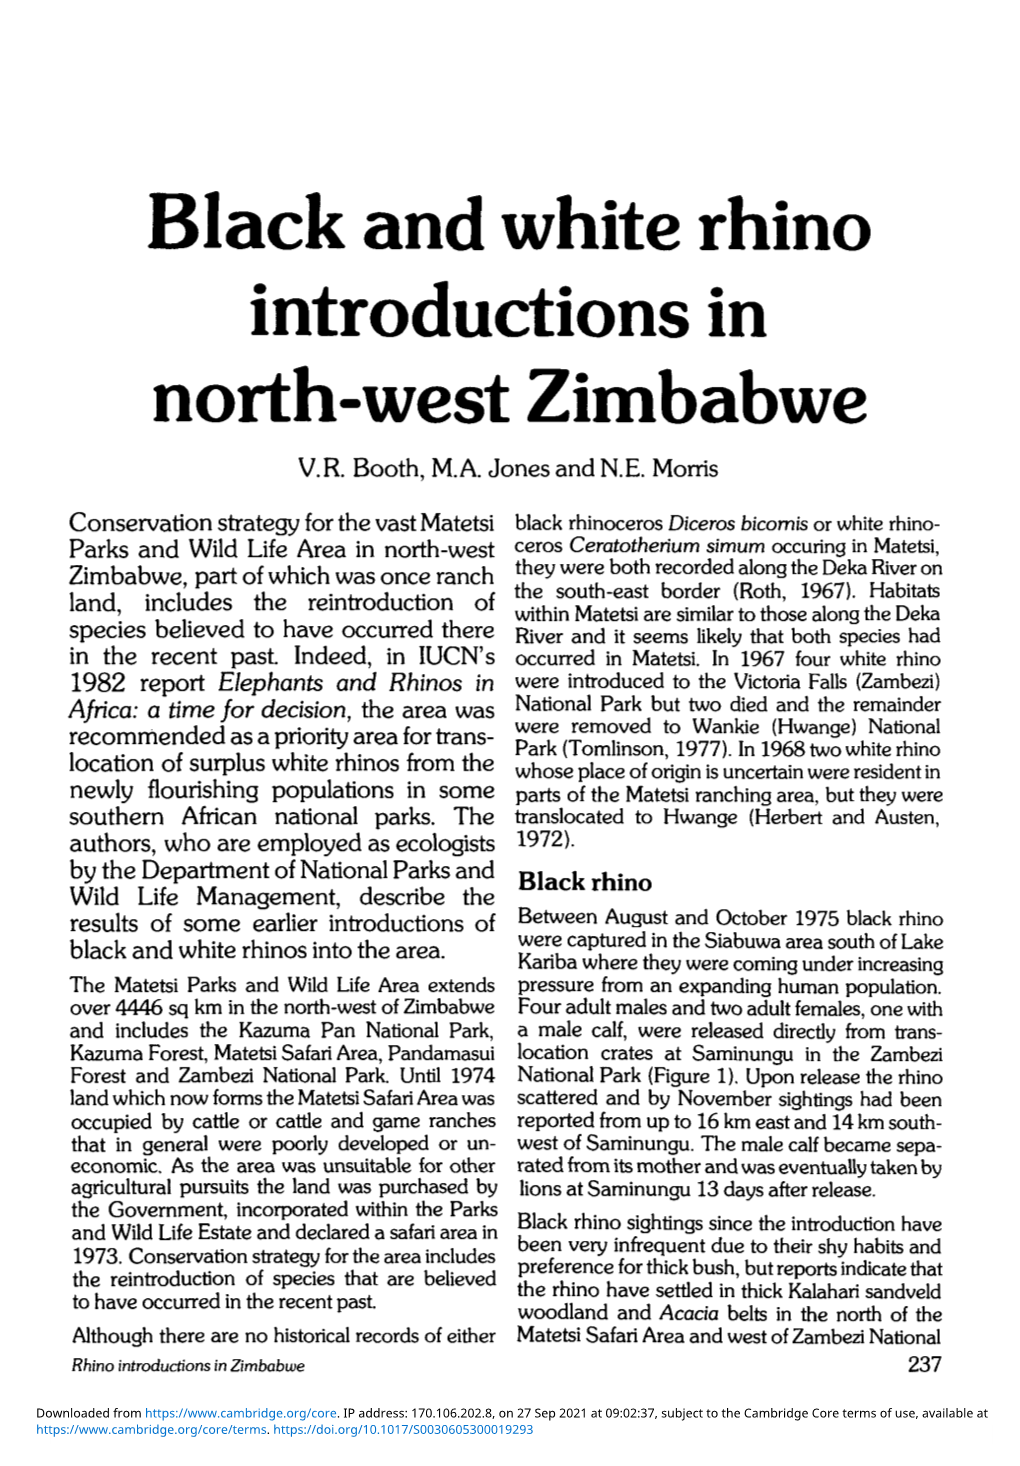 Black and White Rhino Introductions in North-West Zimbabwe V.R